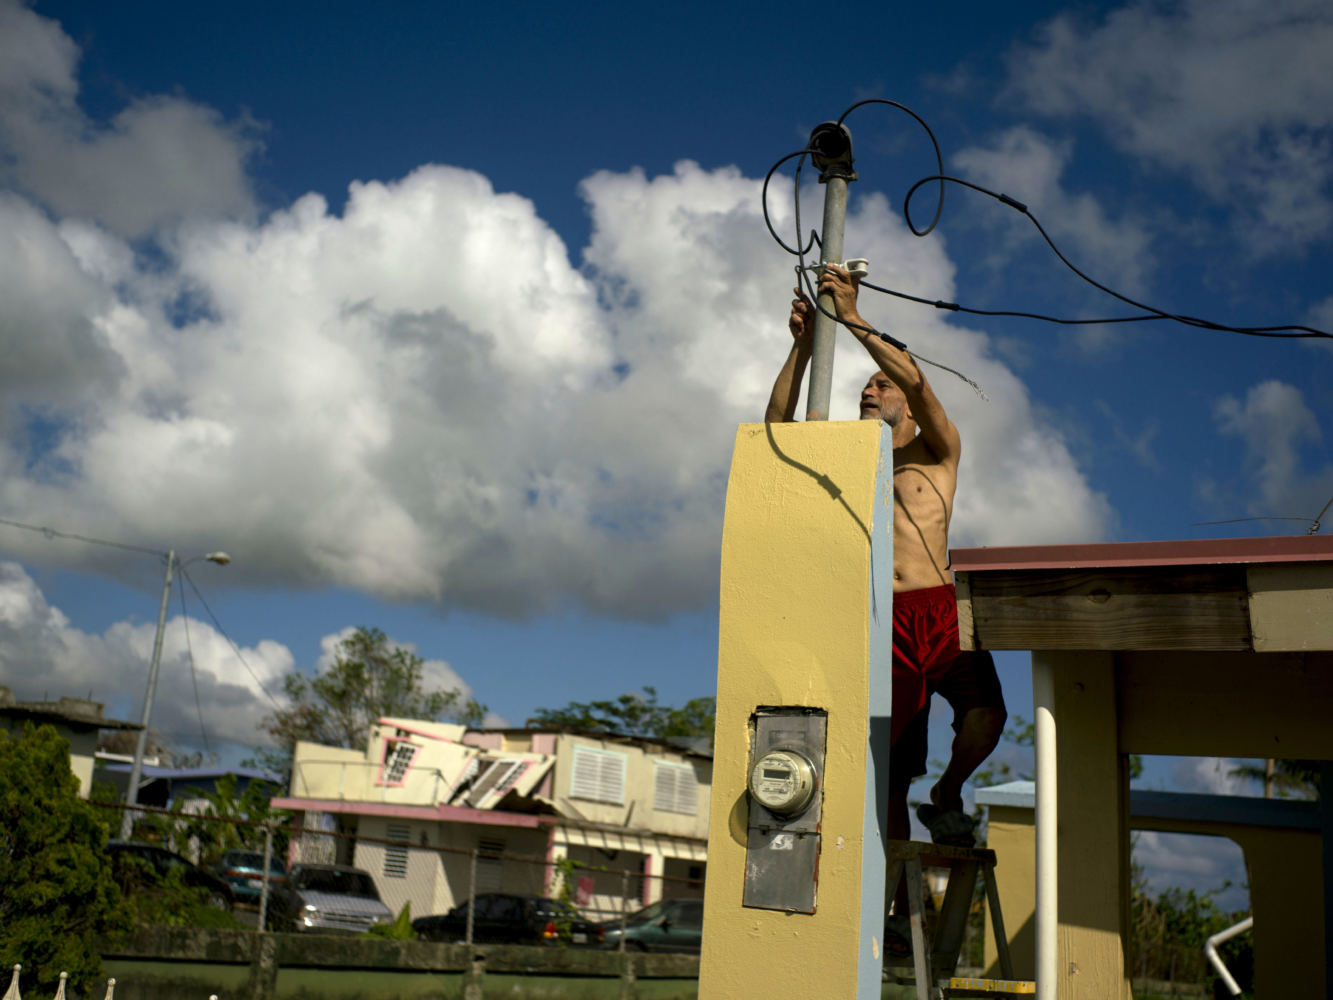 In October 2017, a resident tries to connect electrical lines downed by Hurricane Maria in Toa Baja. Puerto Rican officials say electricity has returned to all residents without it after the hurricane. (Photo by Ramon Espinosa/Associated Press)